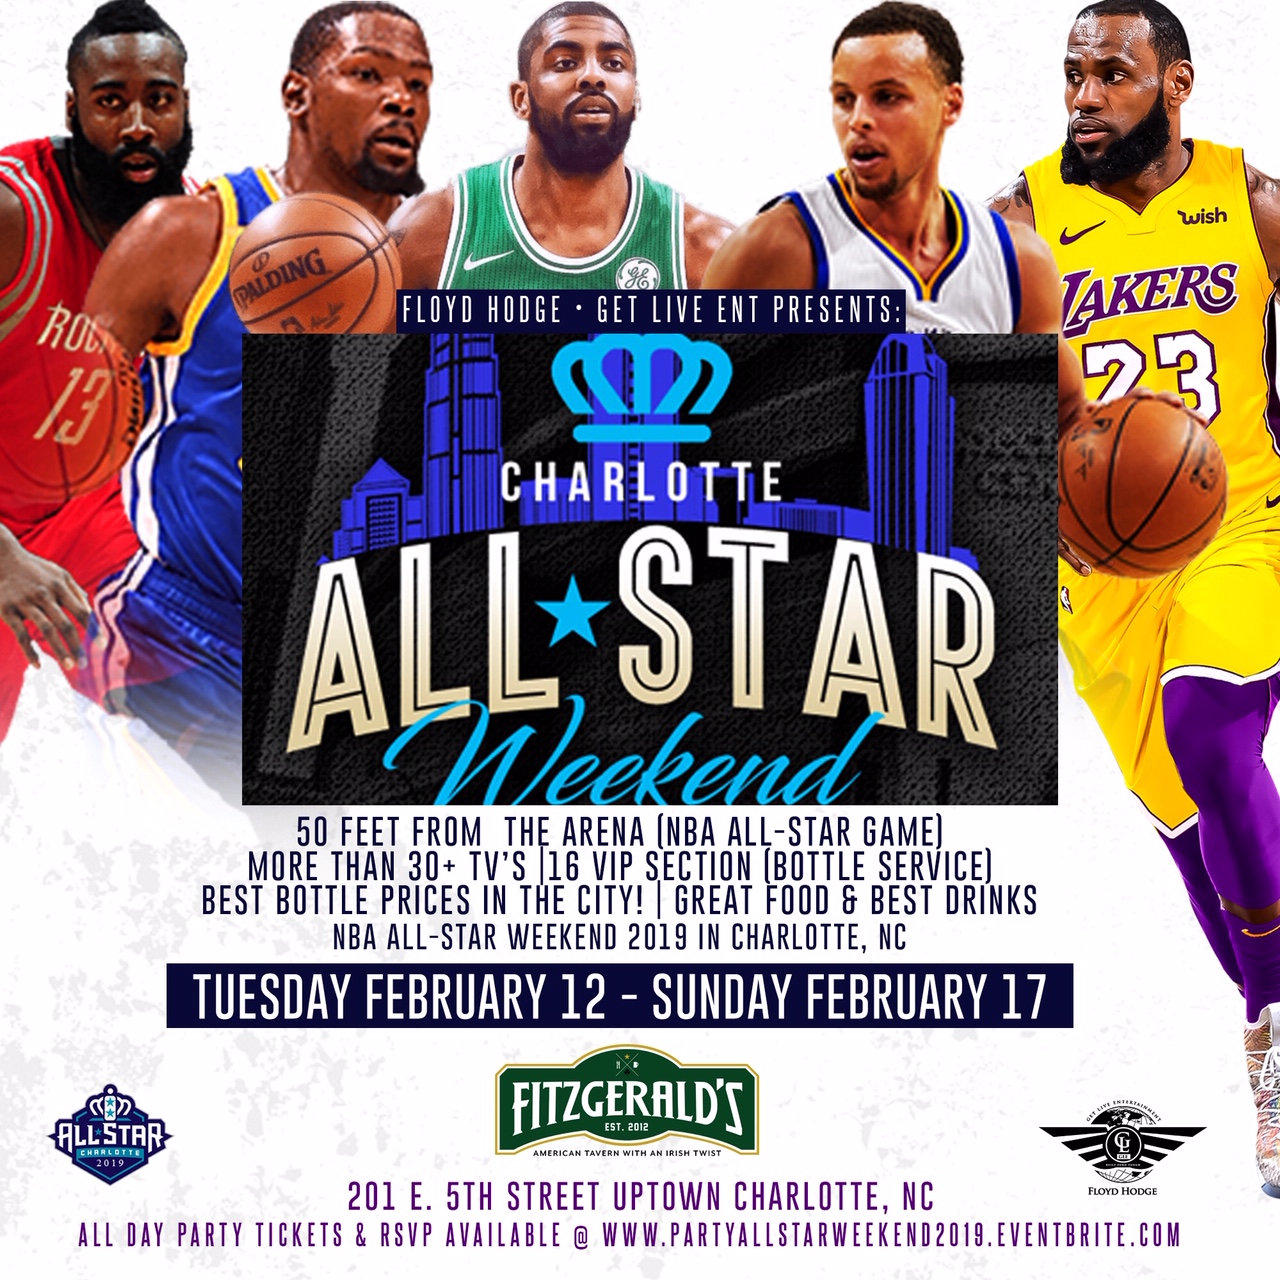 ALLSTAR 2019 weekend Charlotte Party Pass Tickets, Tue, Feb 12, 2019